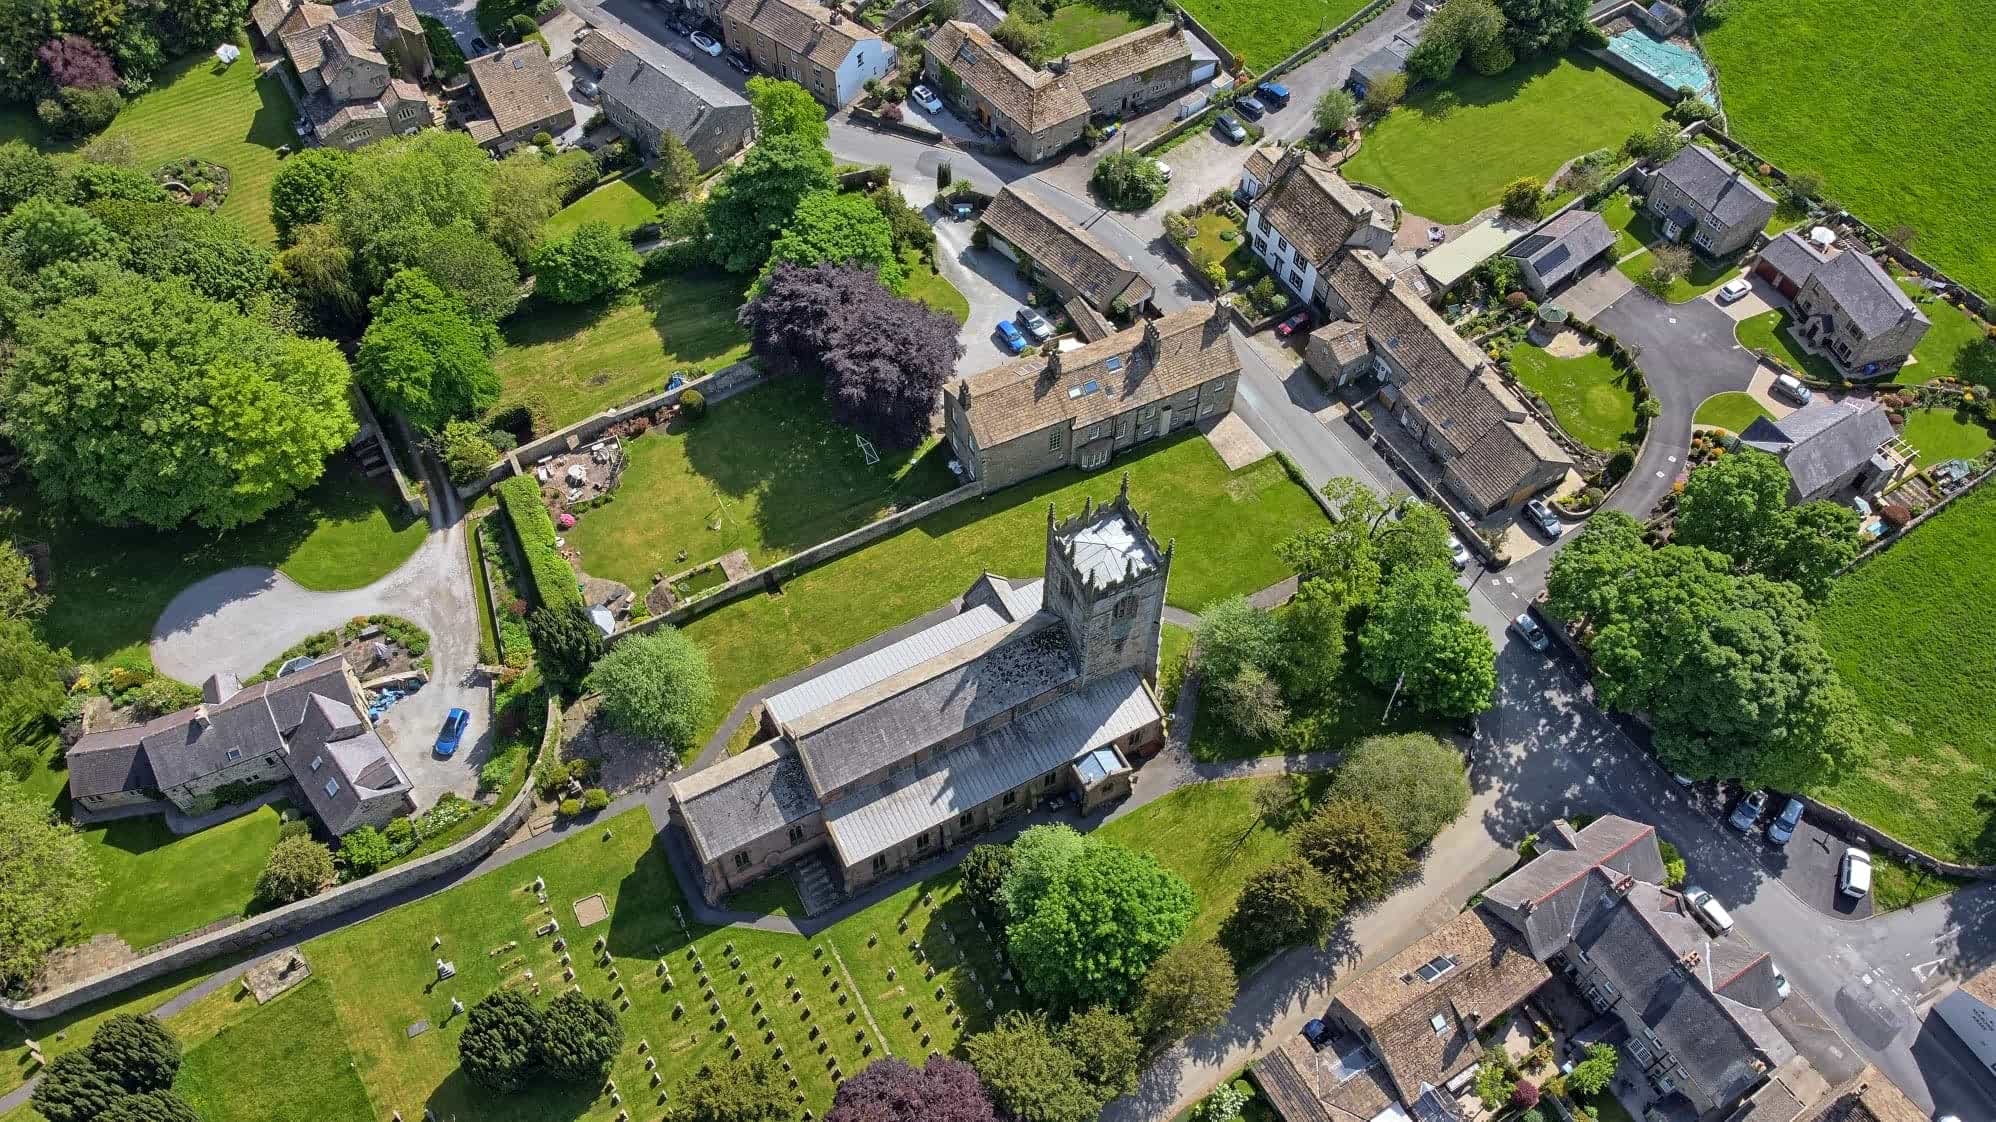 St Andrew's church from above